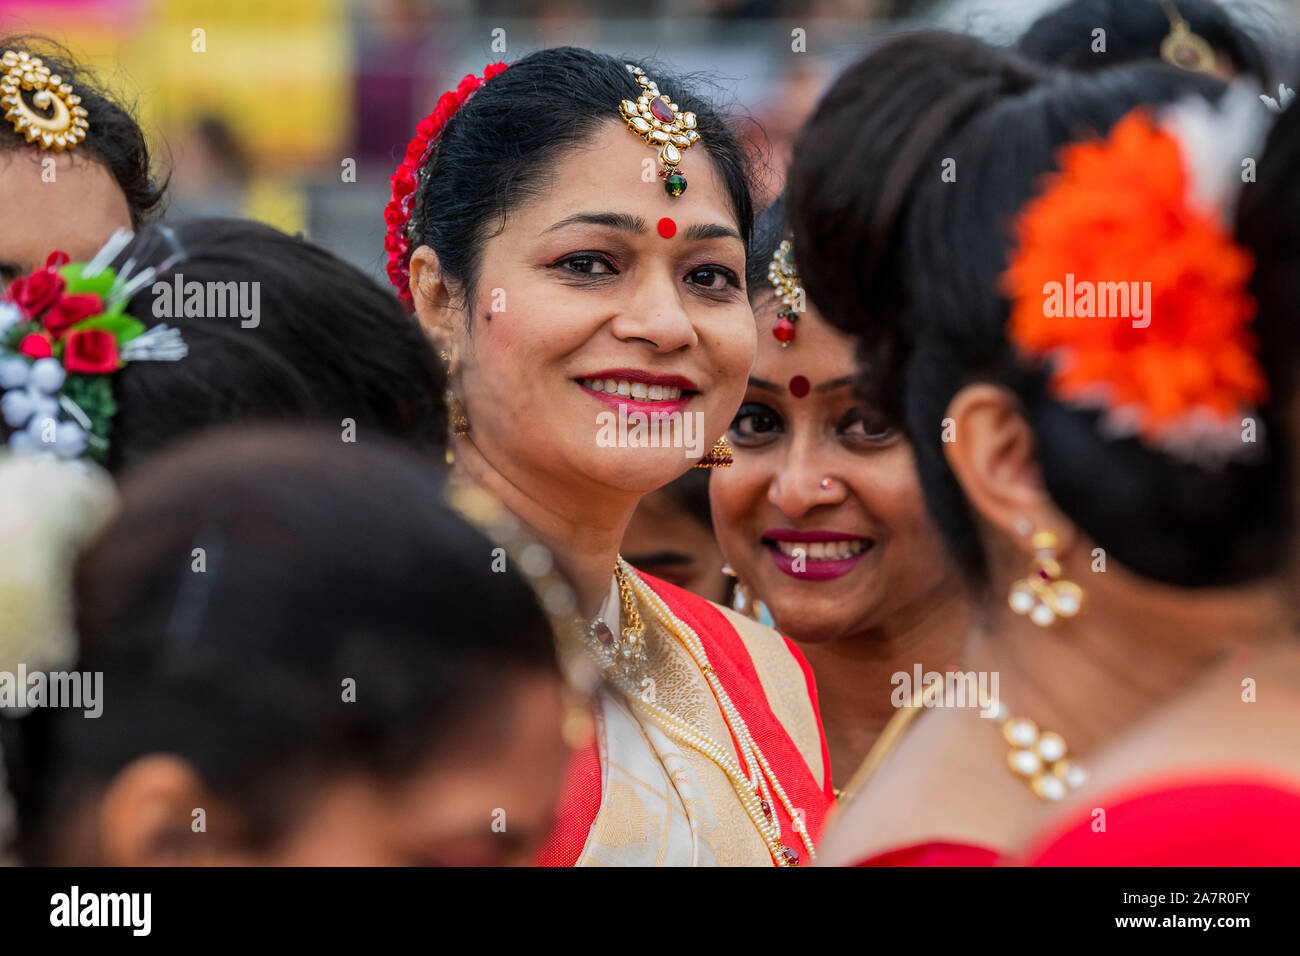 London, UK. 3rd Nov 2019. Diwali on Trafalgar Square, a Mayor of London event, in partnership with the Diwali in London (DiL) Committee. A mix of Indian arts, crafts, culture, food, entertainment, interactive workshops to celebrate Diwali, the Festival of Lights. Credit: Guy Bell/Alamy Live News Stock Photo